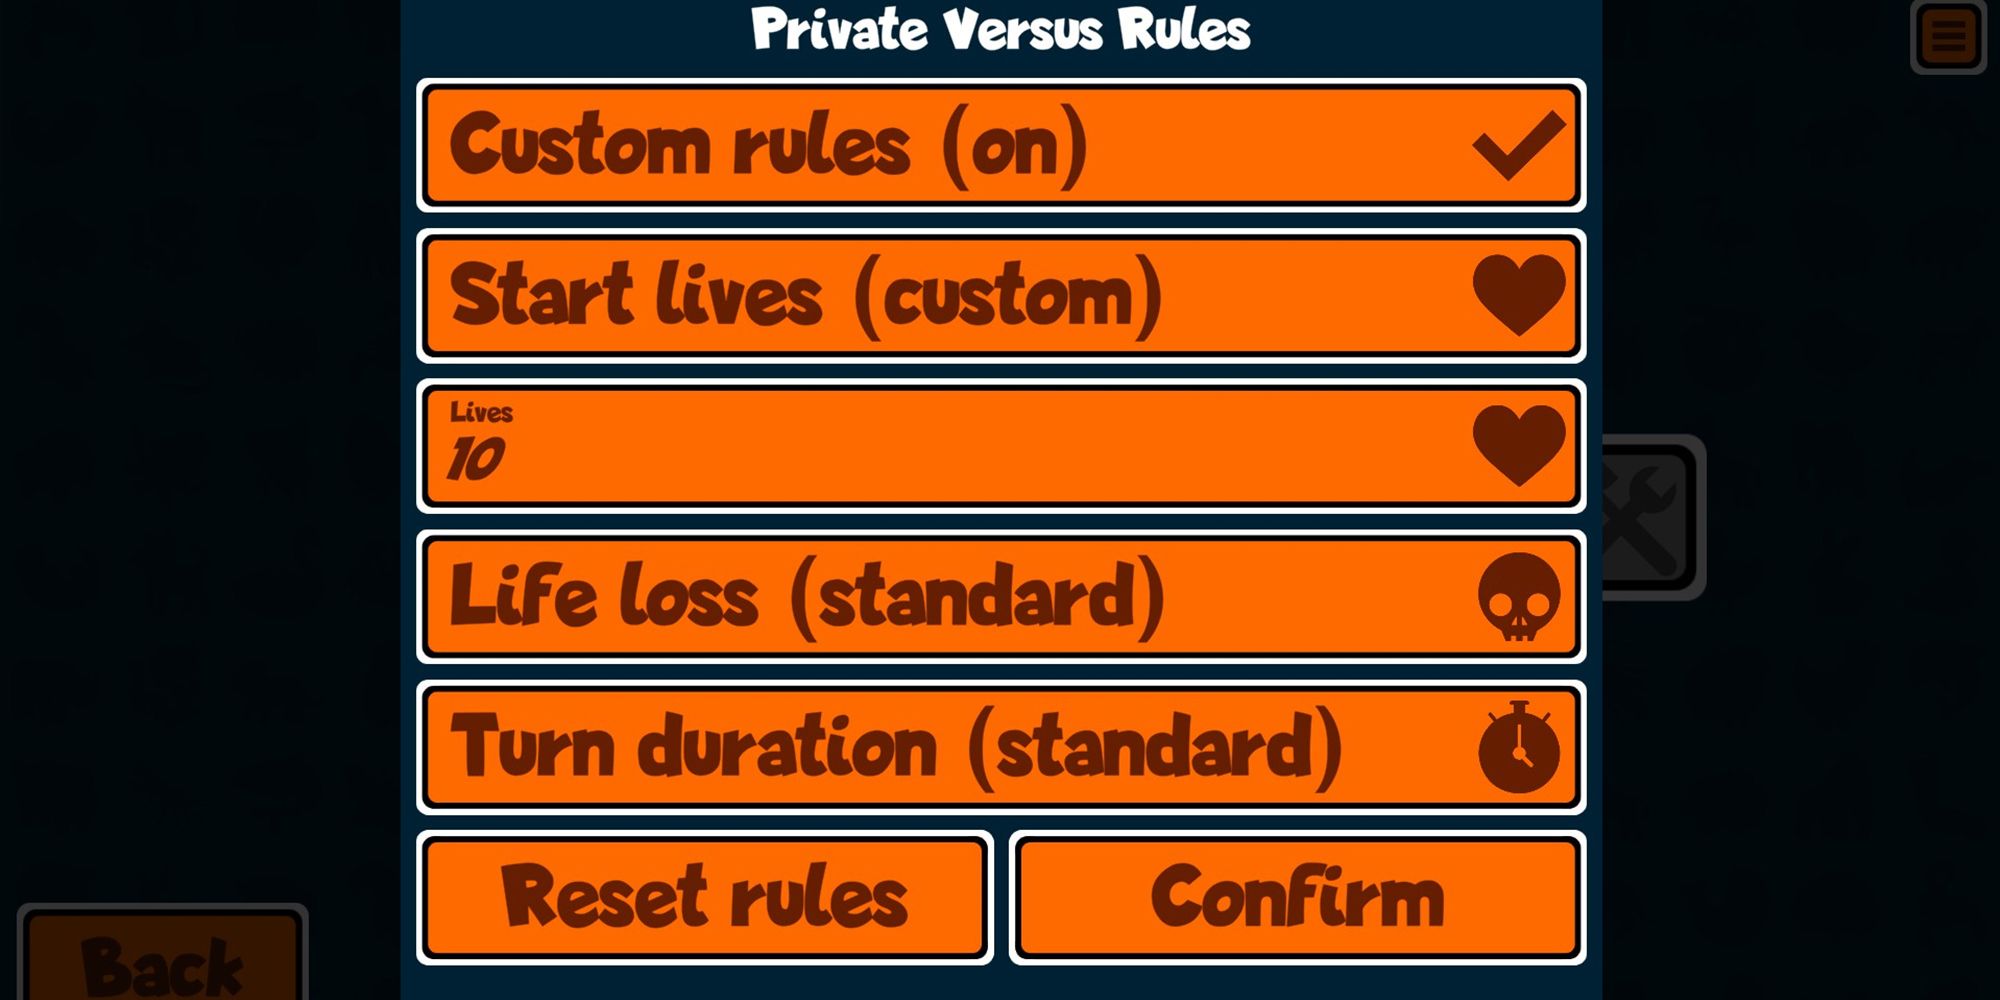 Super Auto Pets - The Private Versus Rules Options Screen